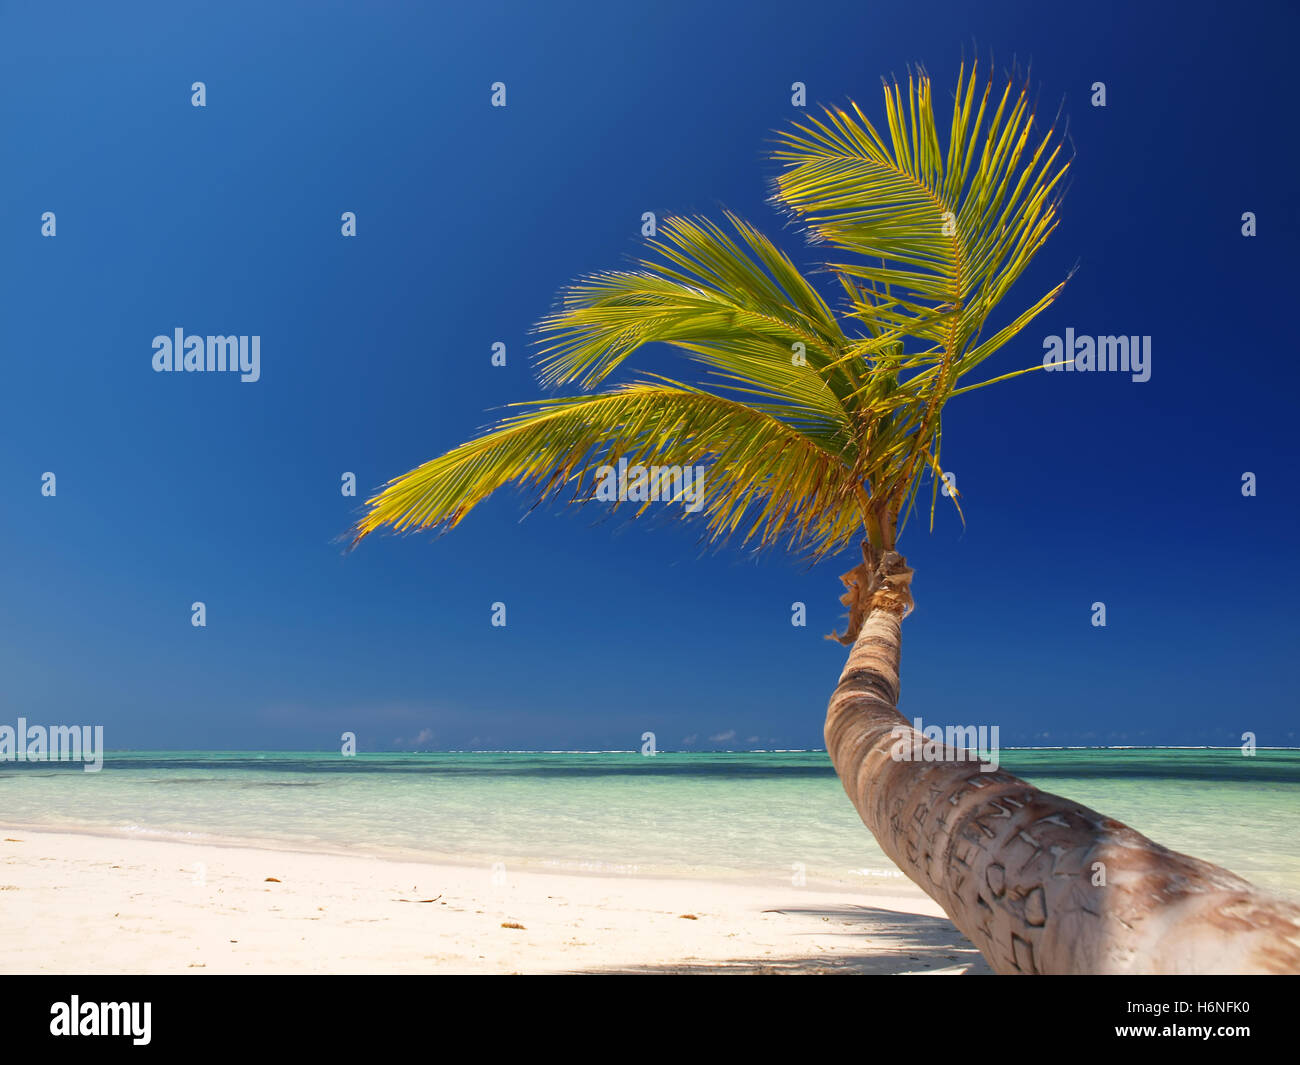 coconut palm tree in the caribbean Stock Photo